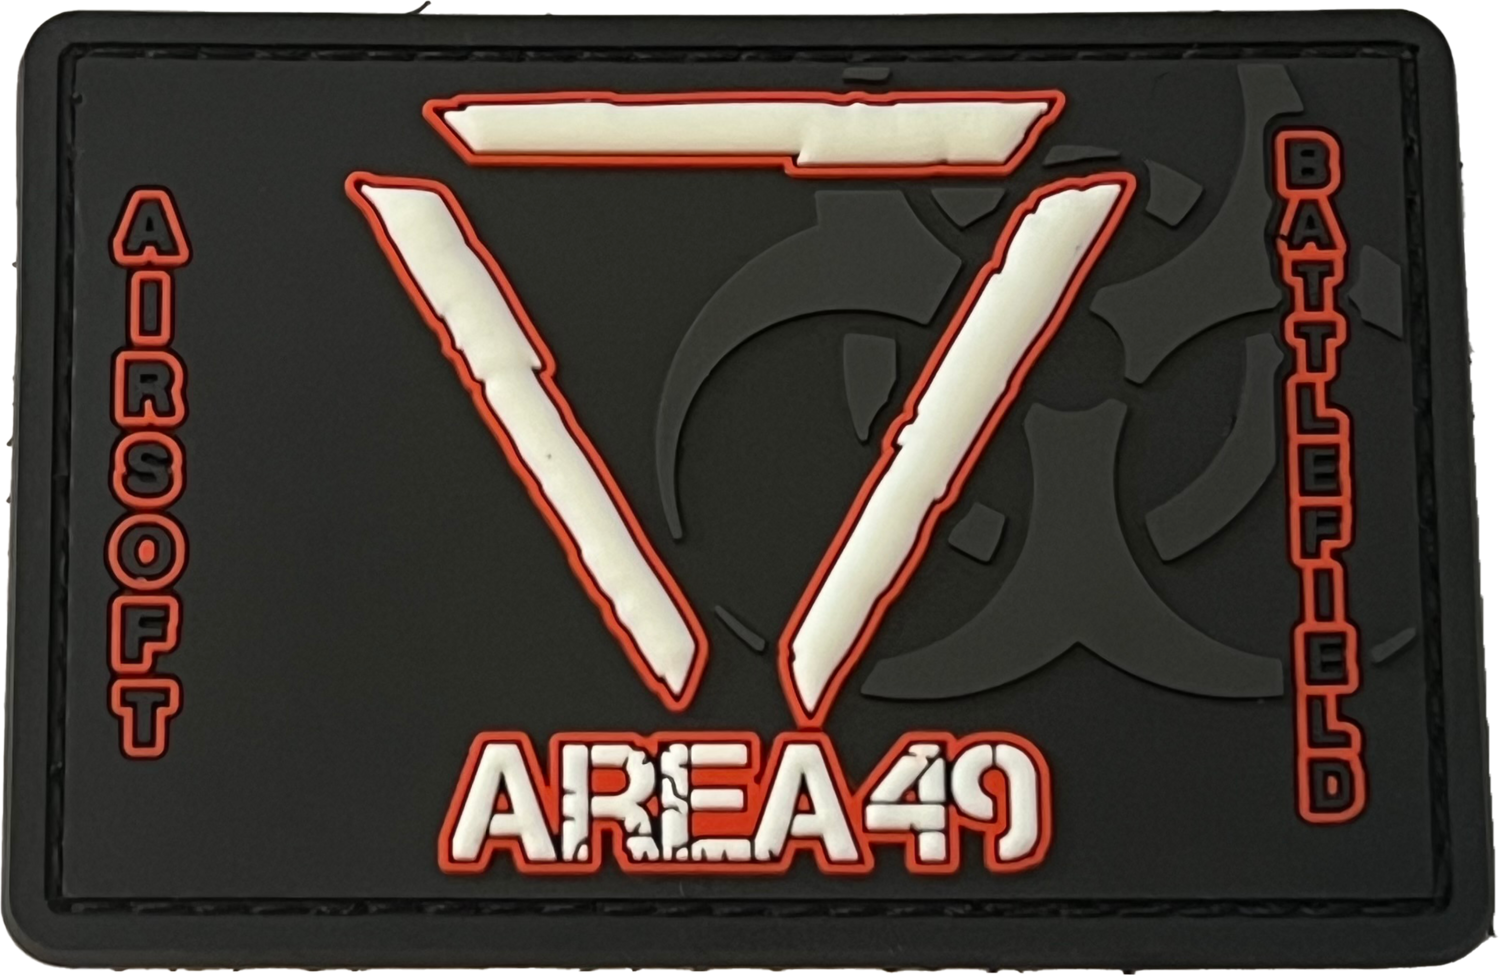 [Area49] "NightGame" Patch V2